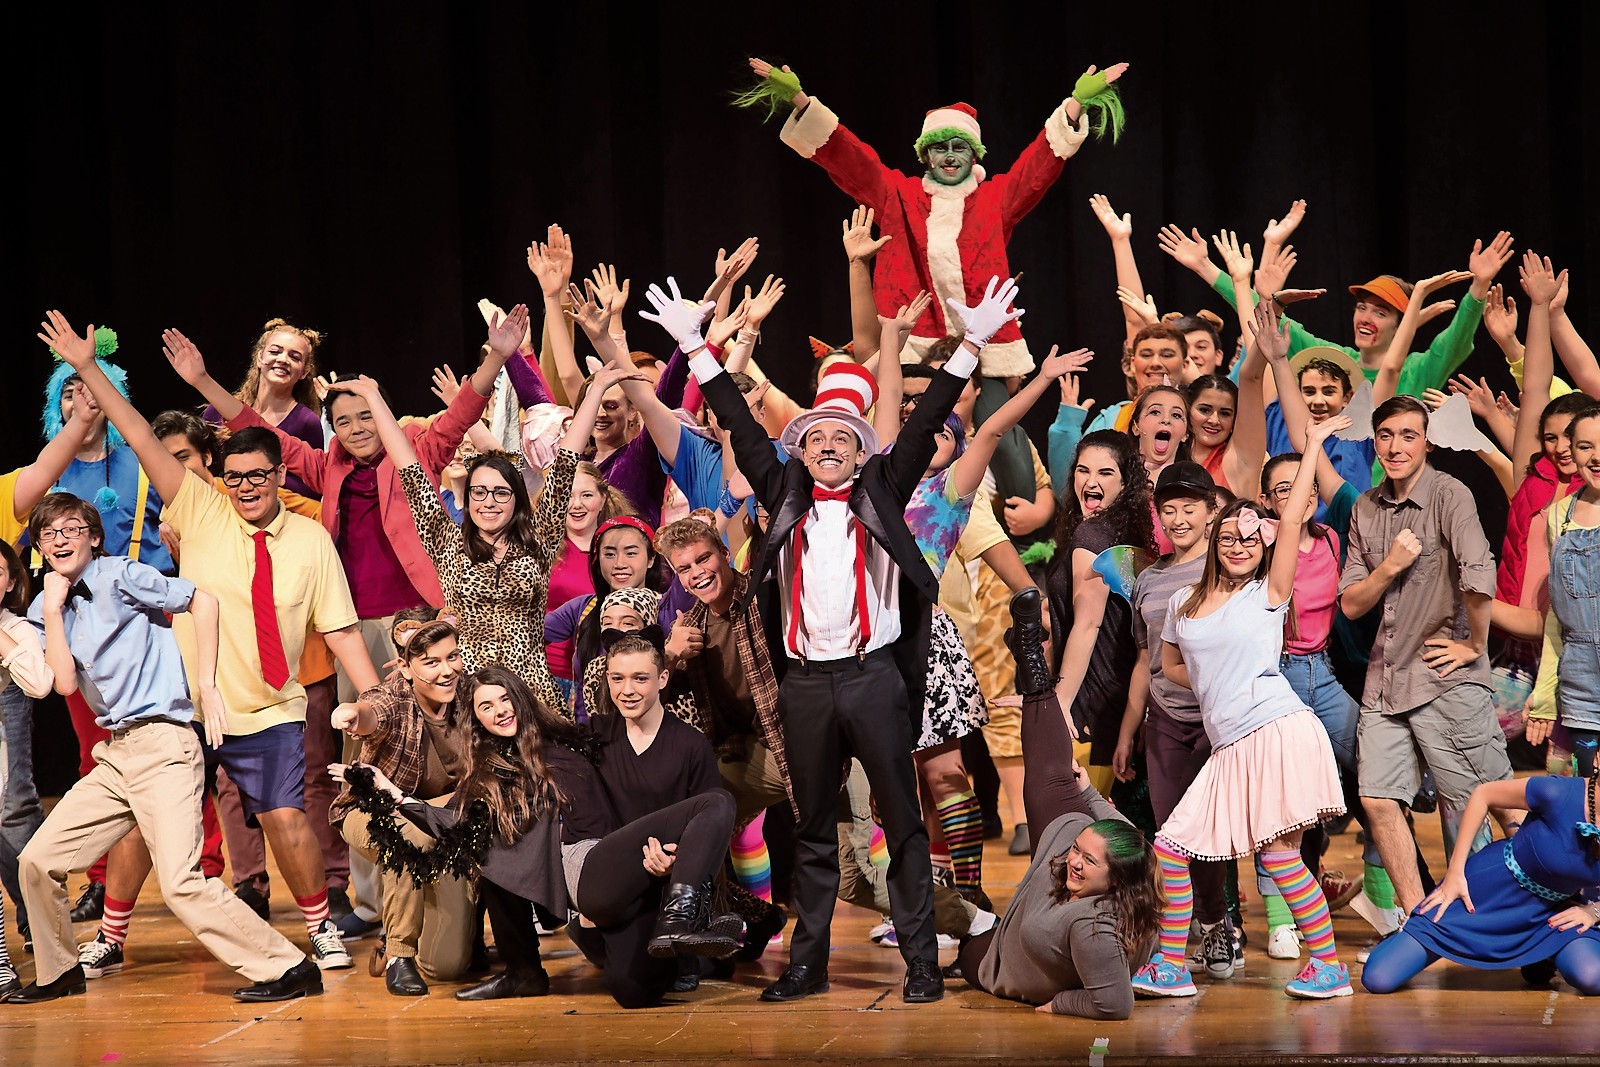 OHS's theater group energized the crowd during its opening scene of “Seussical the Musical” on Jan. 6.